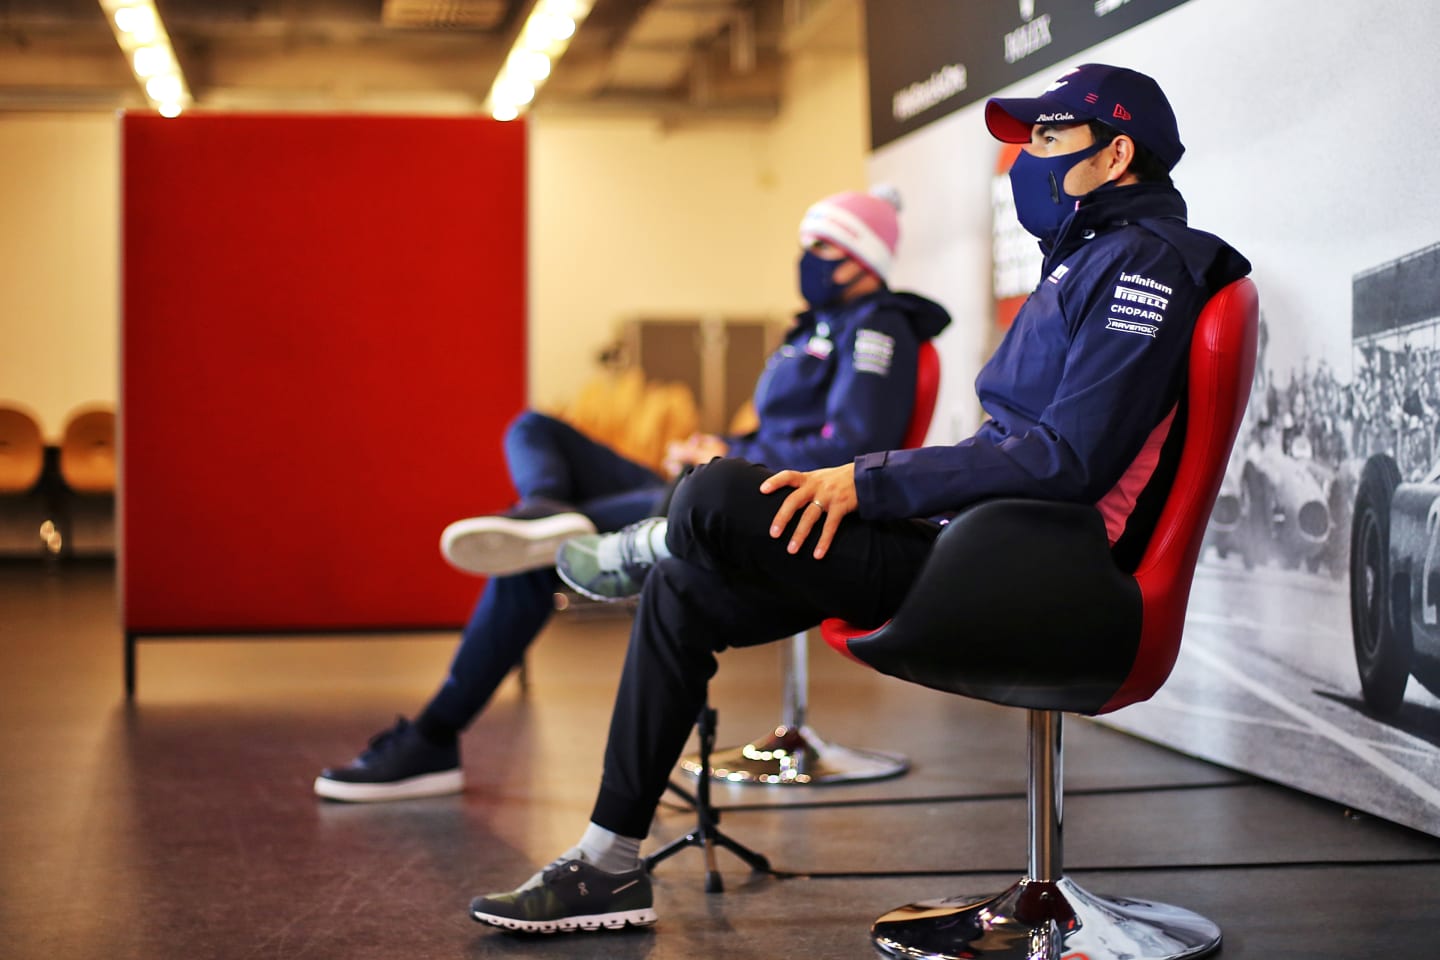 NUERBURG, GERMANY - OCTOBER 08: Lance Stroll of Canada and Racing Point and Sergio Perez of Mexico and Racing Point talk in the Drivers Press Conference during previews ahead of the F1 Eifel Grand Prix at Nuerburgring on October 08, 2020 in Nuerburg, Germany. (Photo by XPB - Pool/Getty Images)